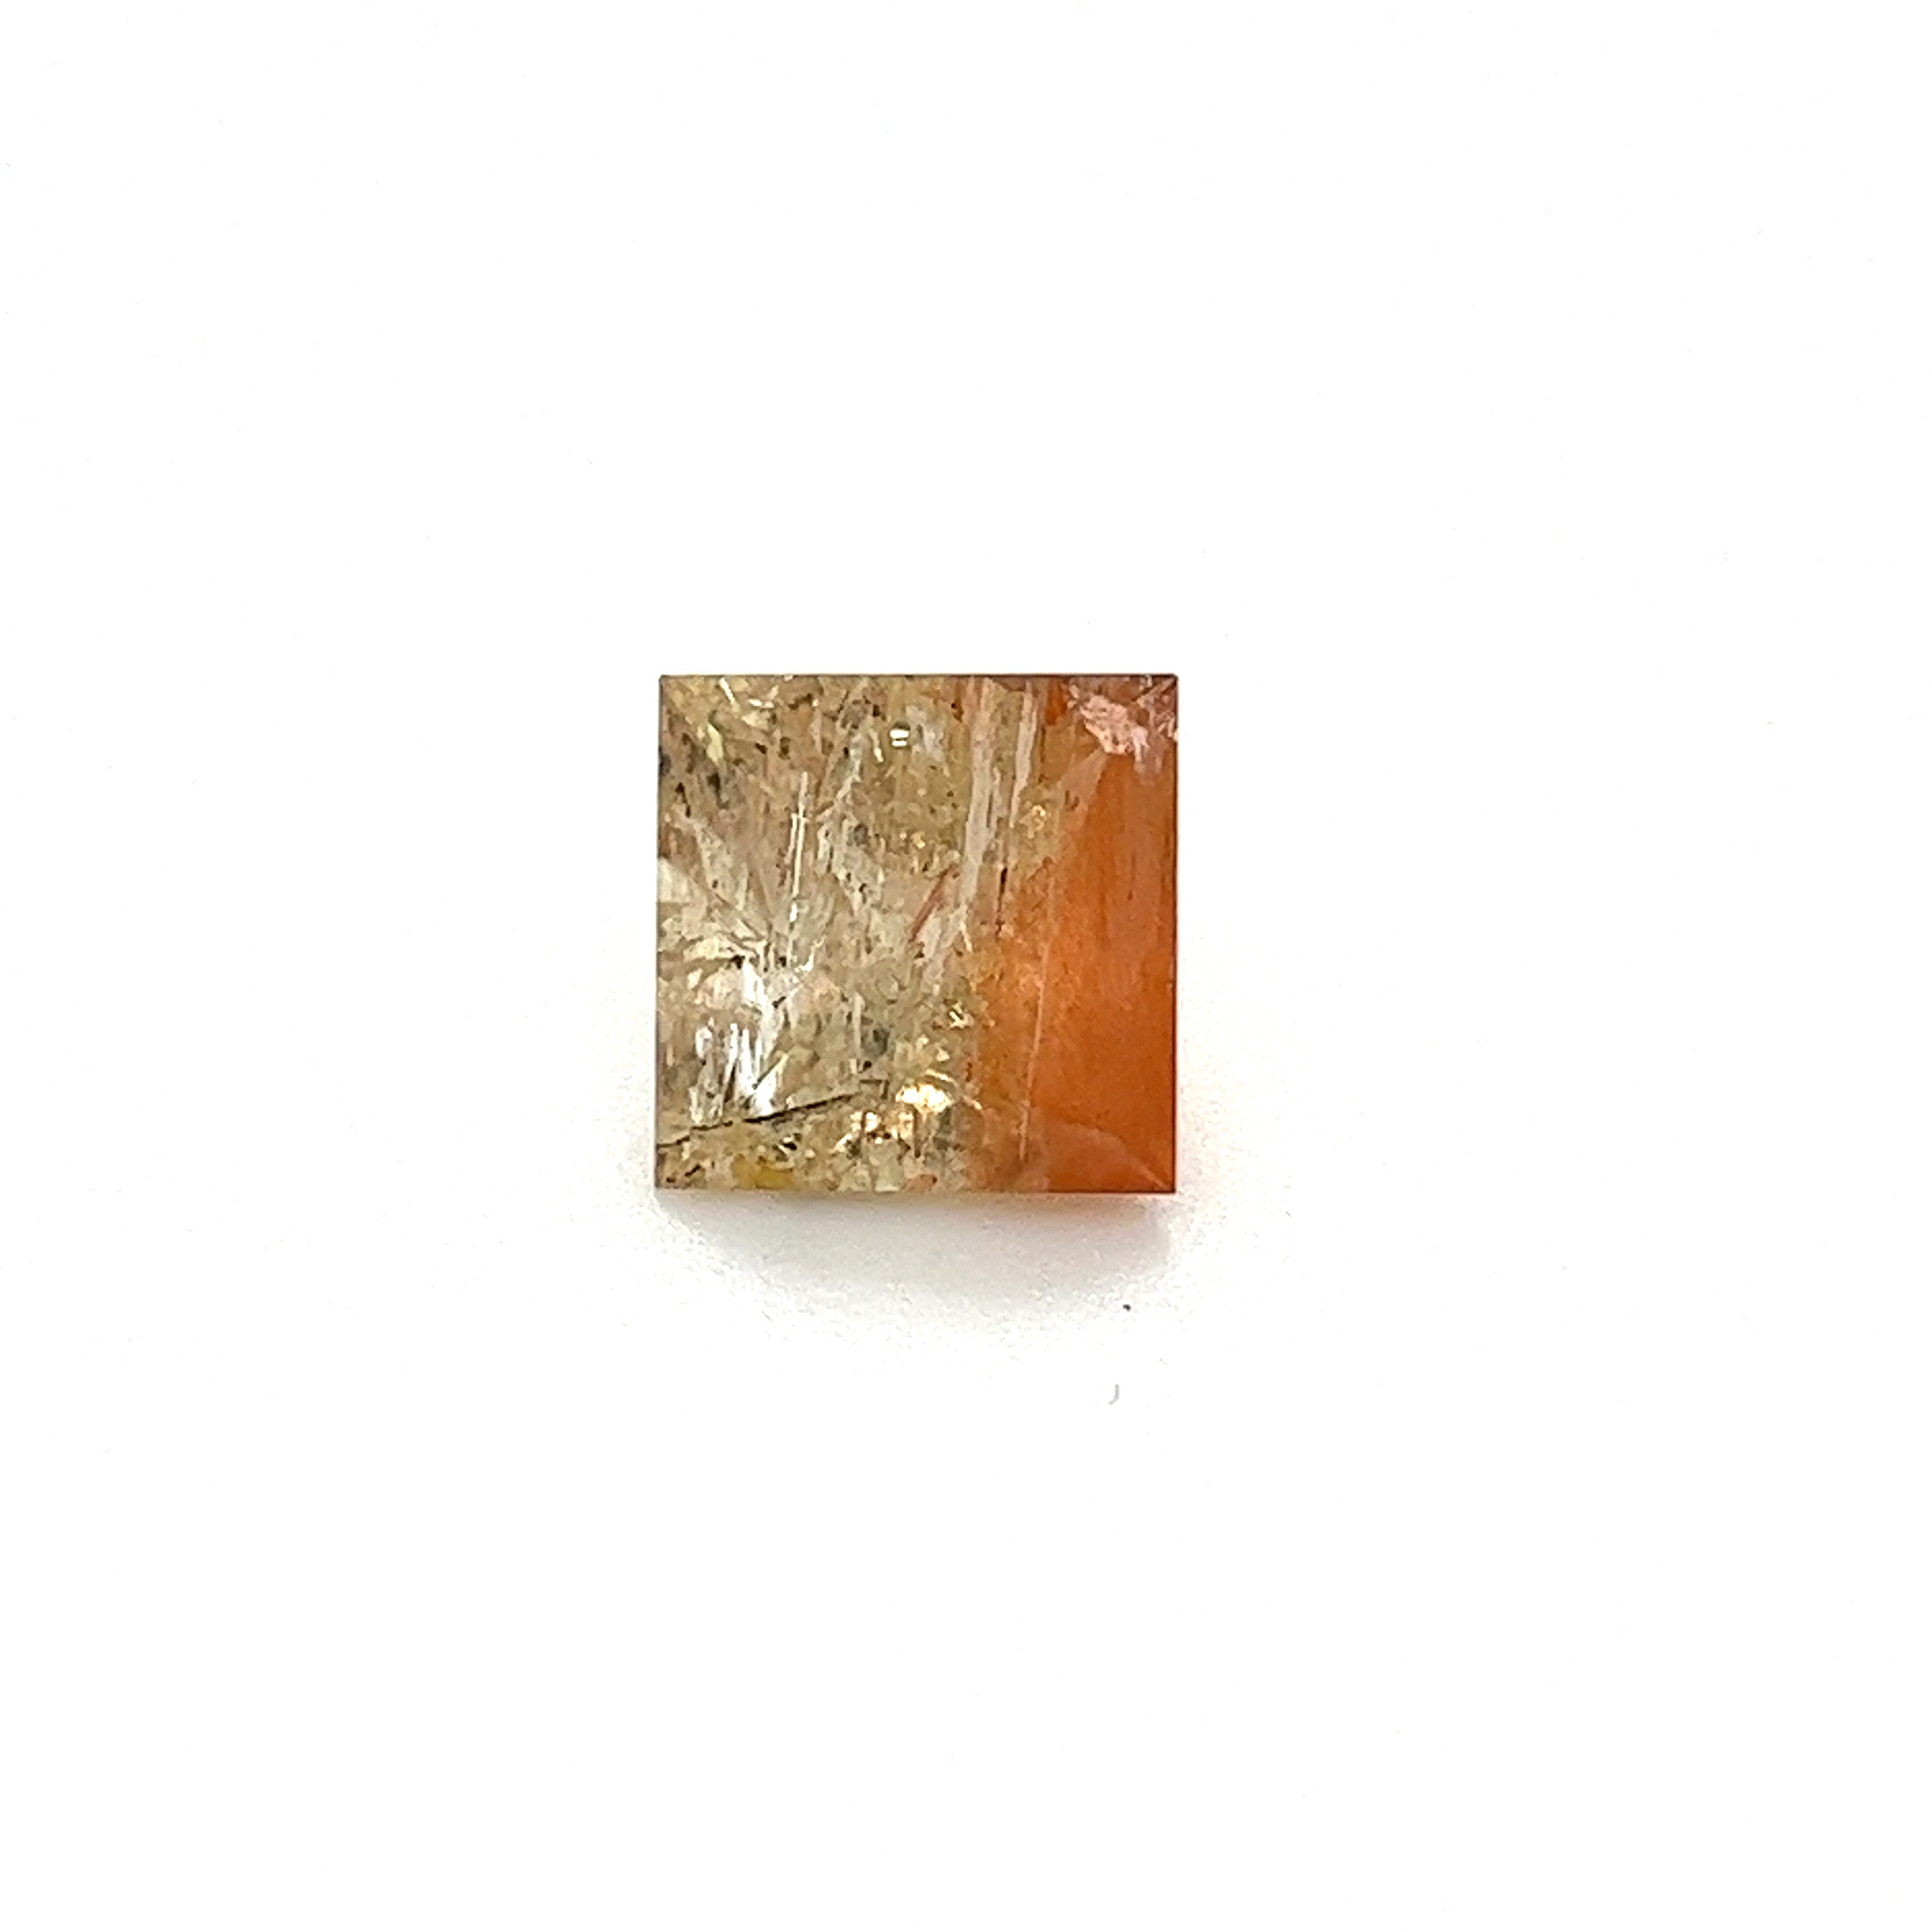 Scapolite Gemstone; Natural Untreated Tanzanian Copper Scapolite, 3.225cts - Mark Oliver Gems